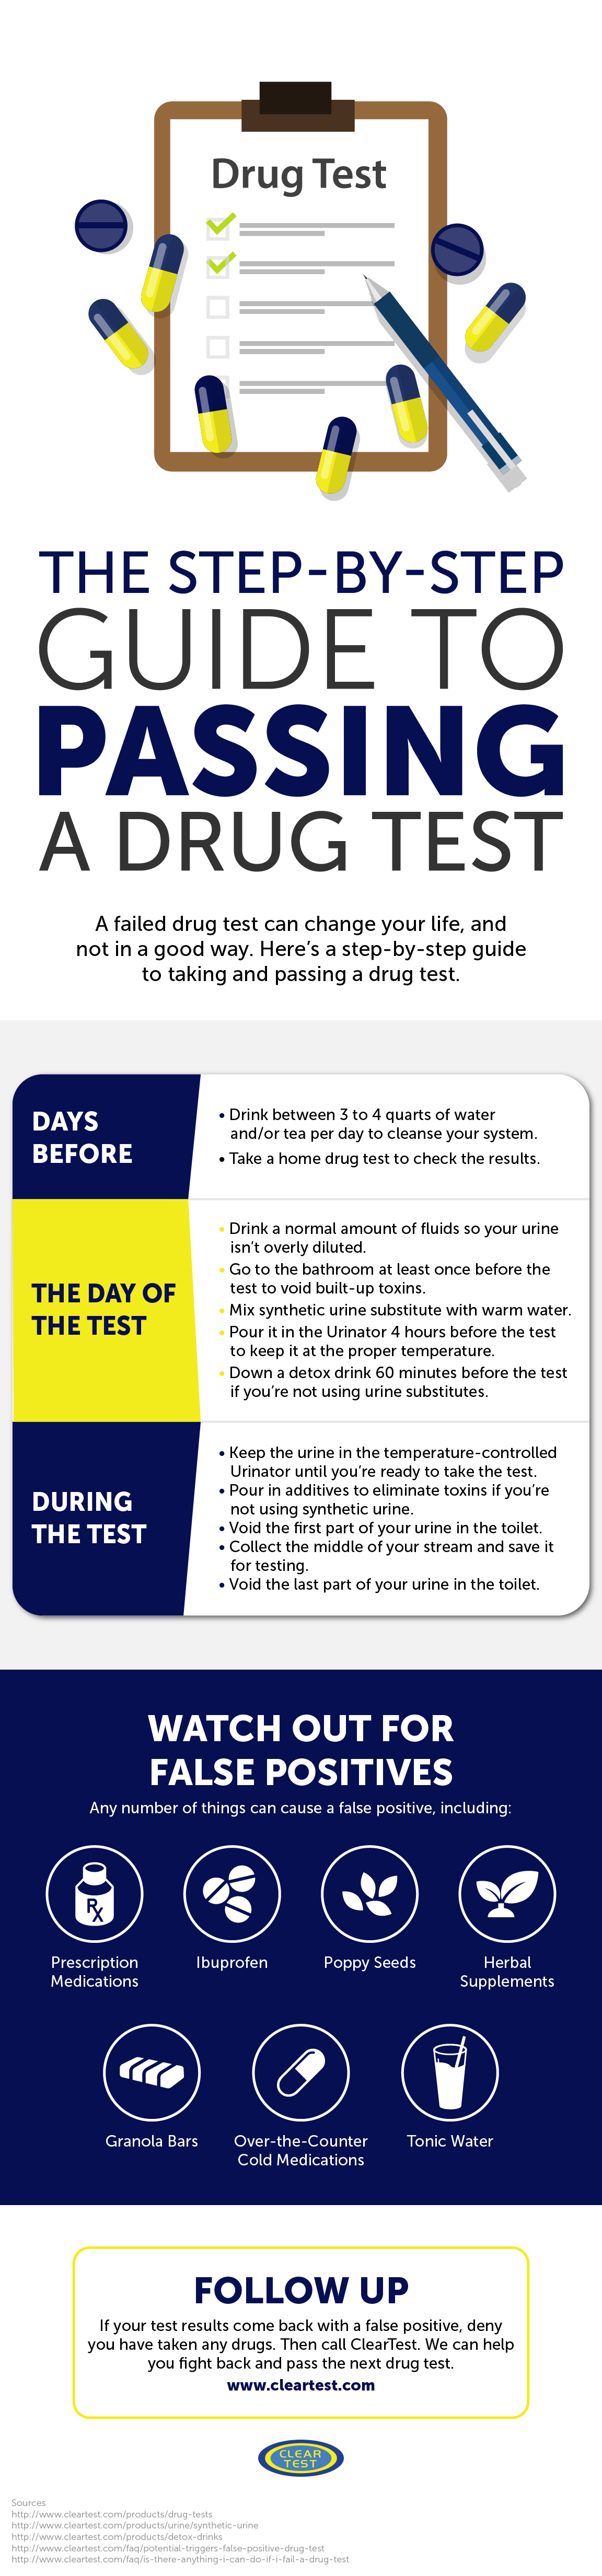 The Step-by-Step Guide to Passing a Drug Test